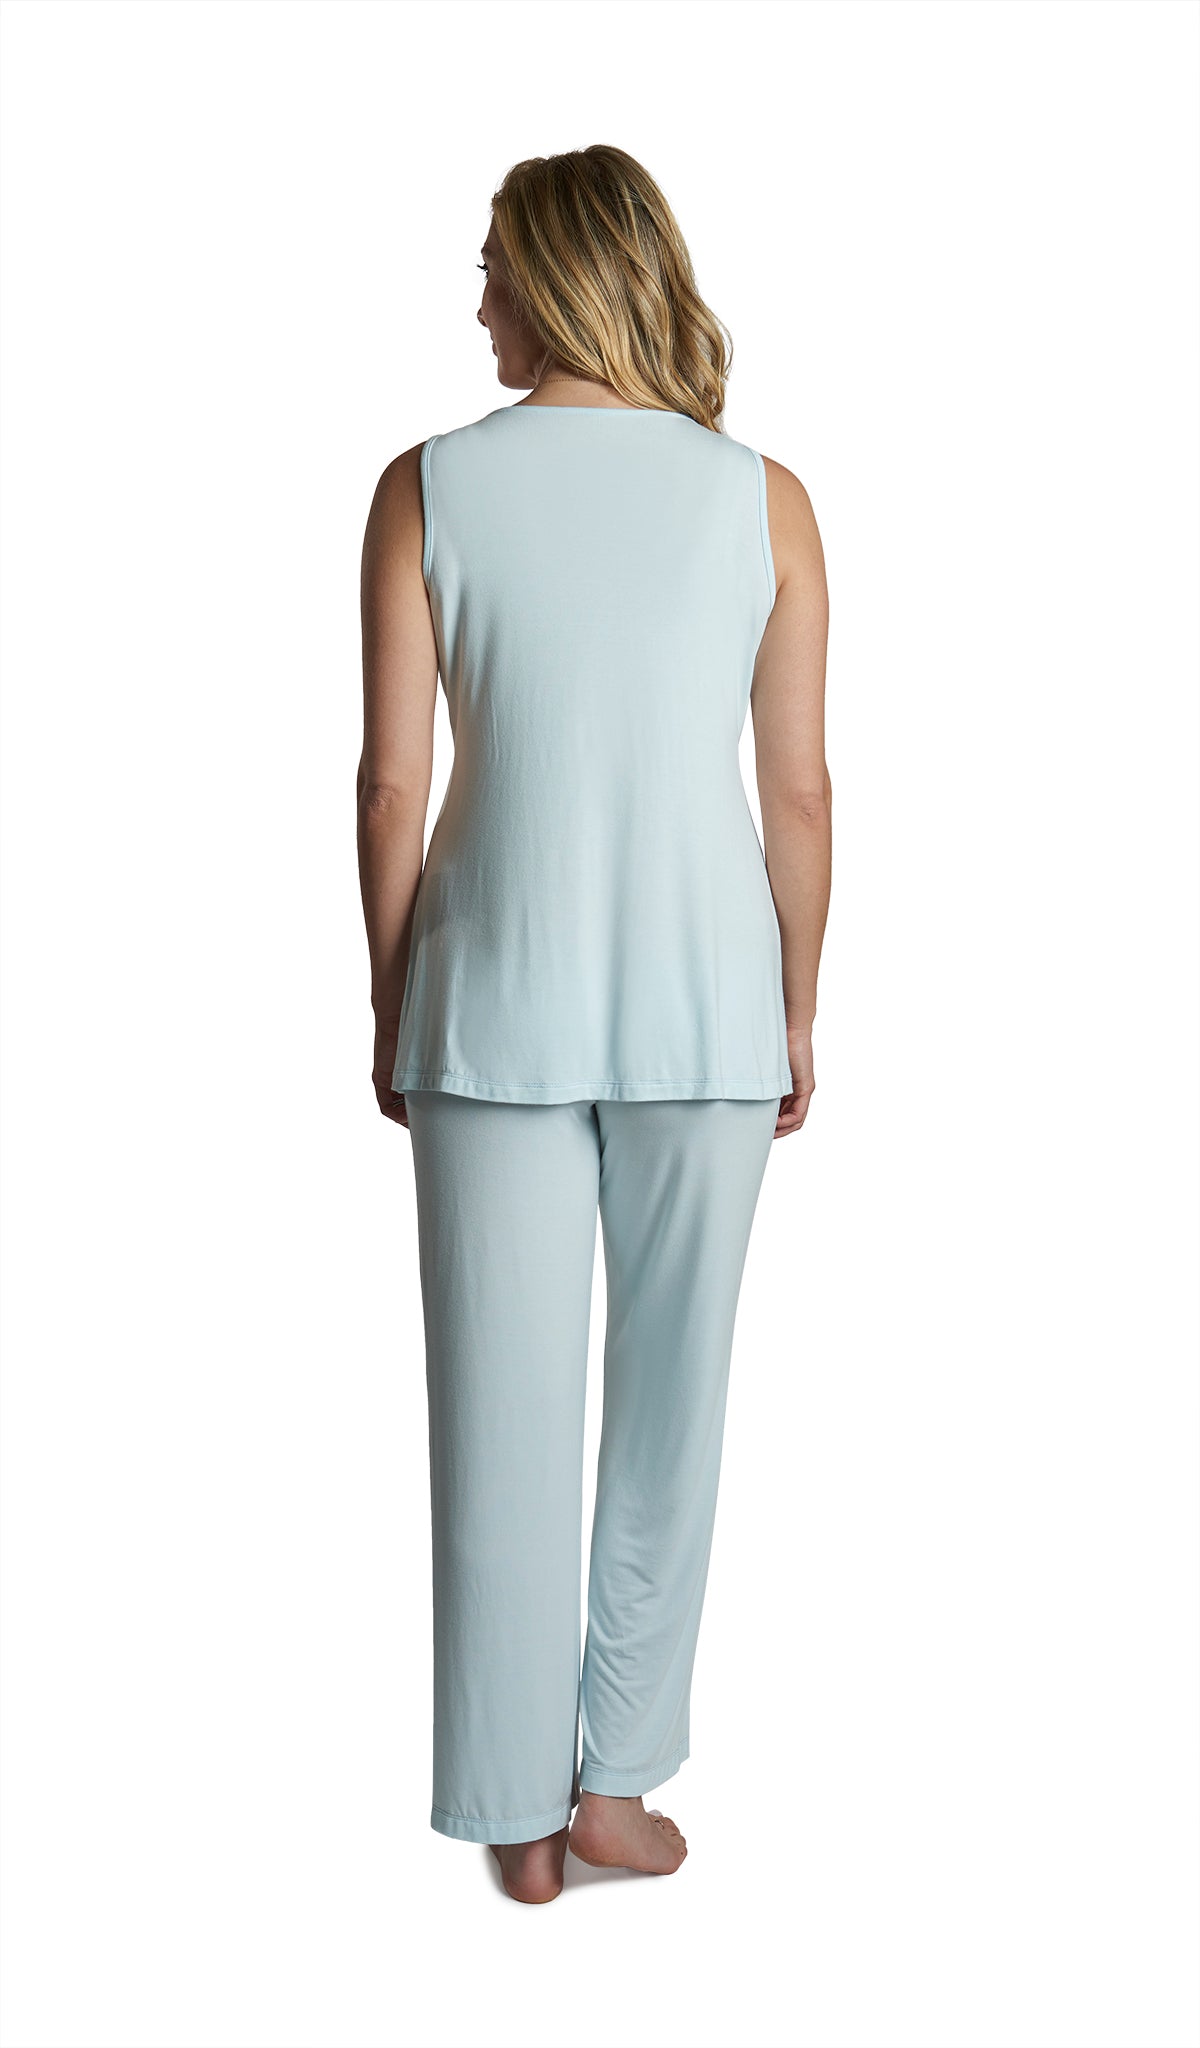 Whispering Blue Analise 5-Piece Set, back shot of woman wearing tank top and pant.